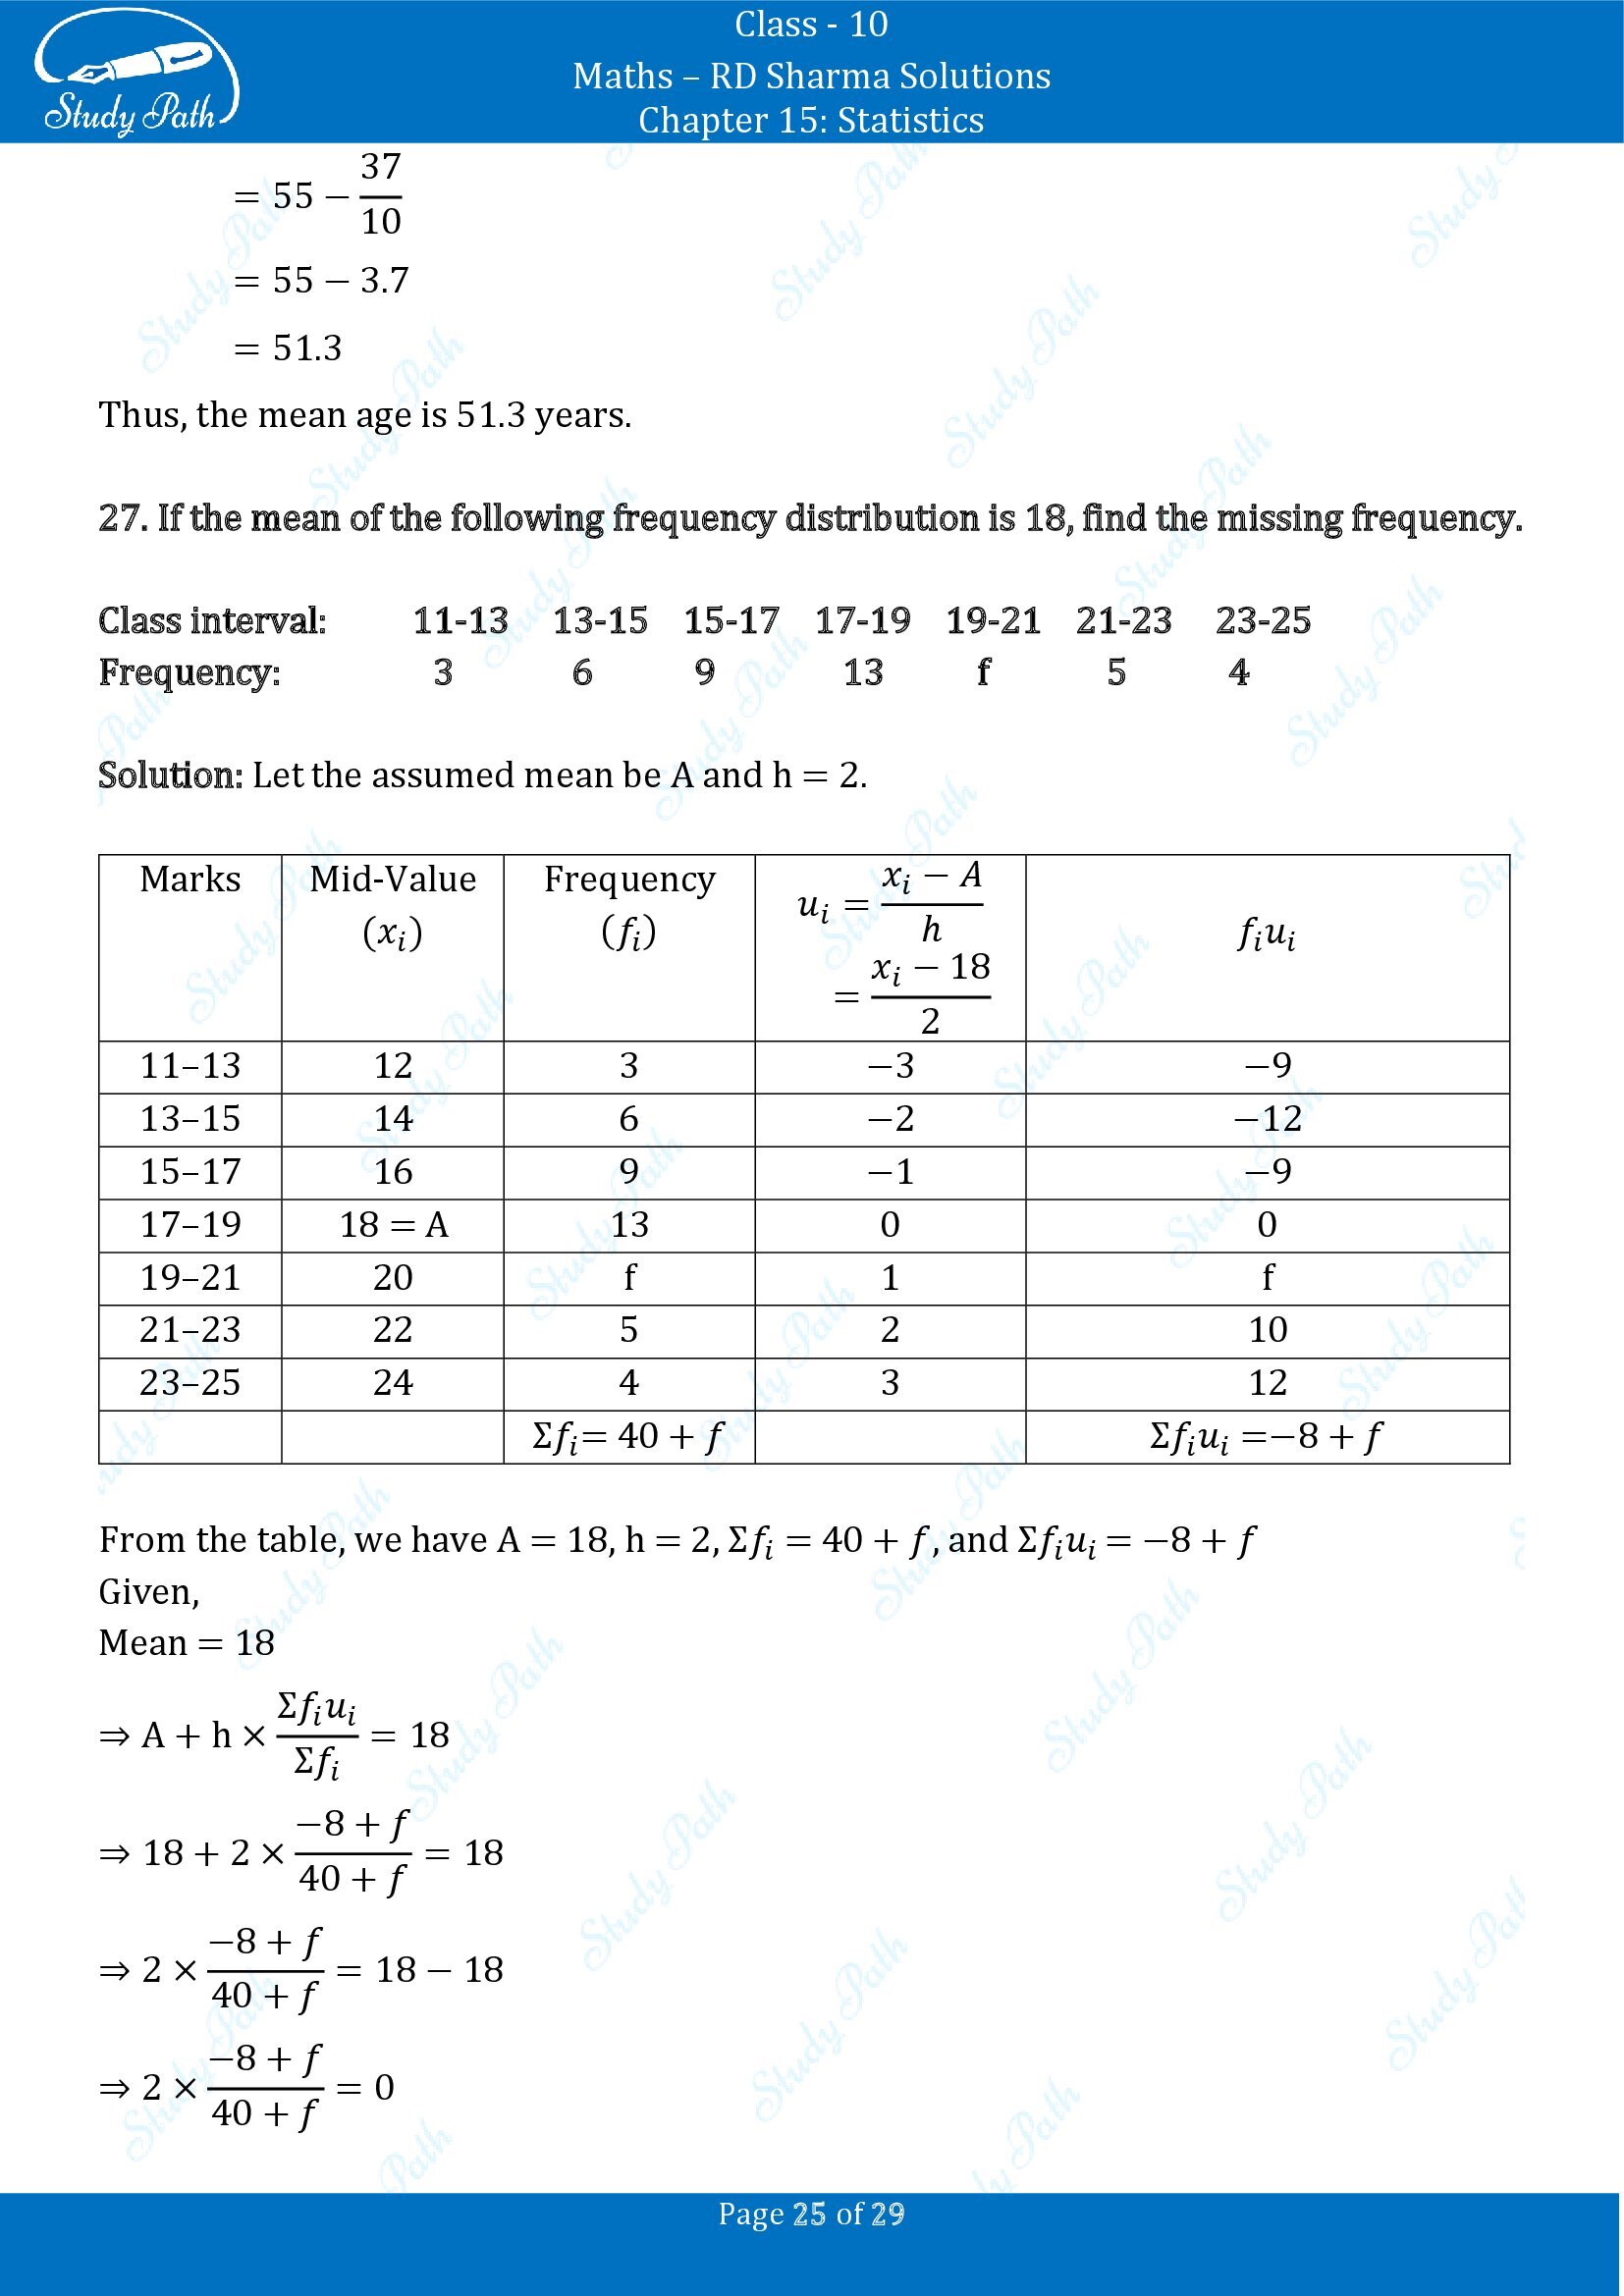 RD Sharma Solutions Class 10 Chapter 15 Statistics Exercise 15.3 0025